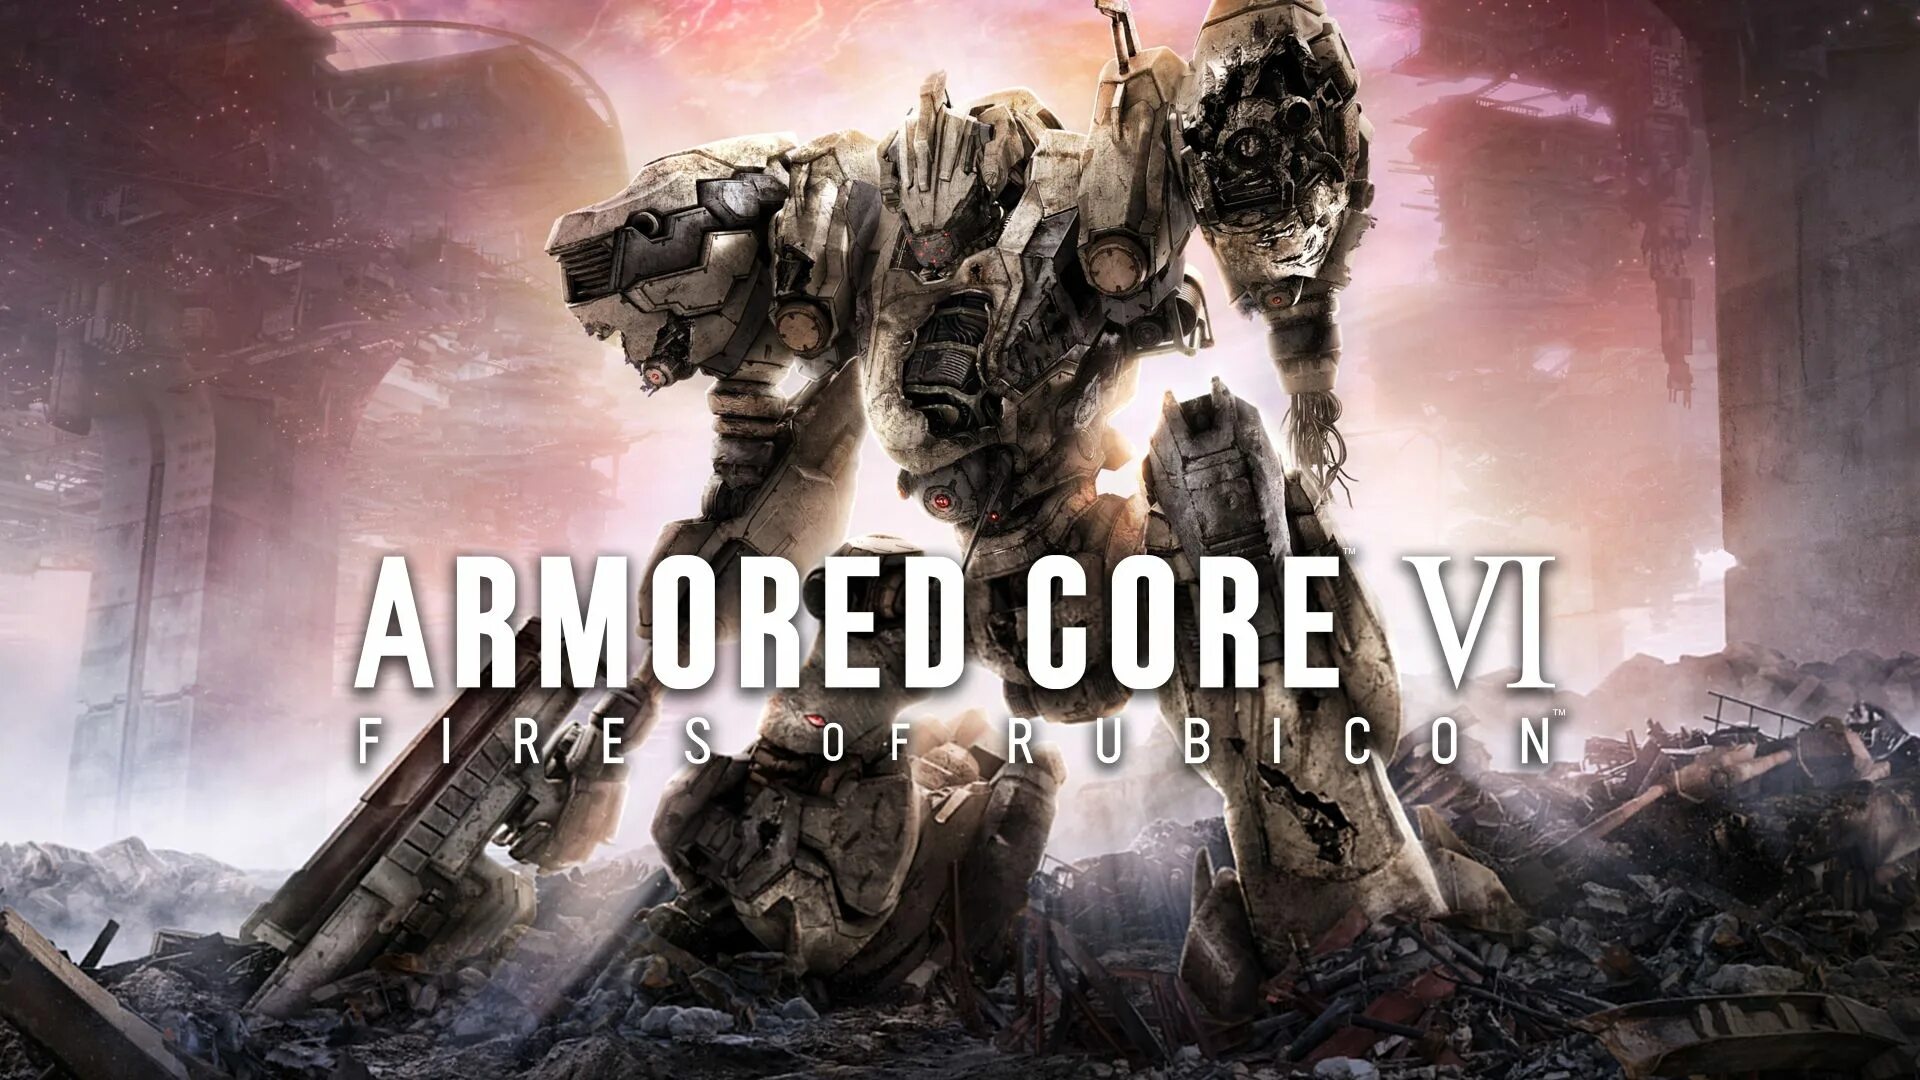 Armored Core 6: Fires of Rubicon. Armored Core 6 Art. Armored Core vi: Fires of Rubicon игра. Armored Core vi: Fires of Rubicon ps5.